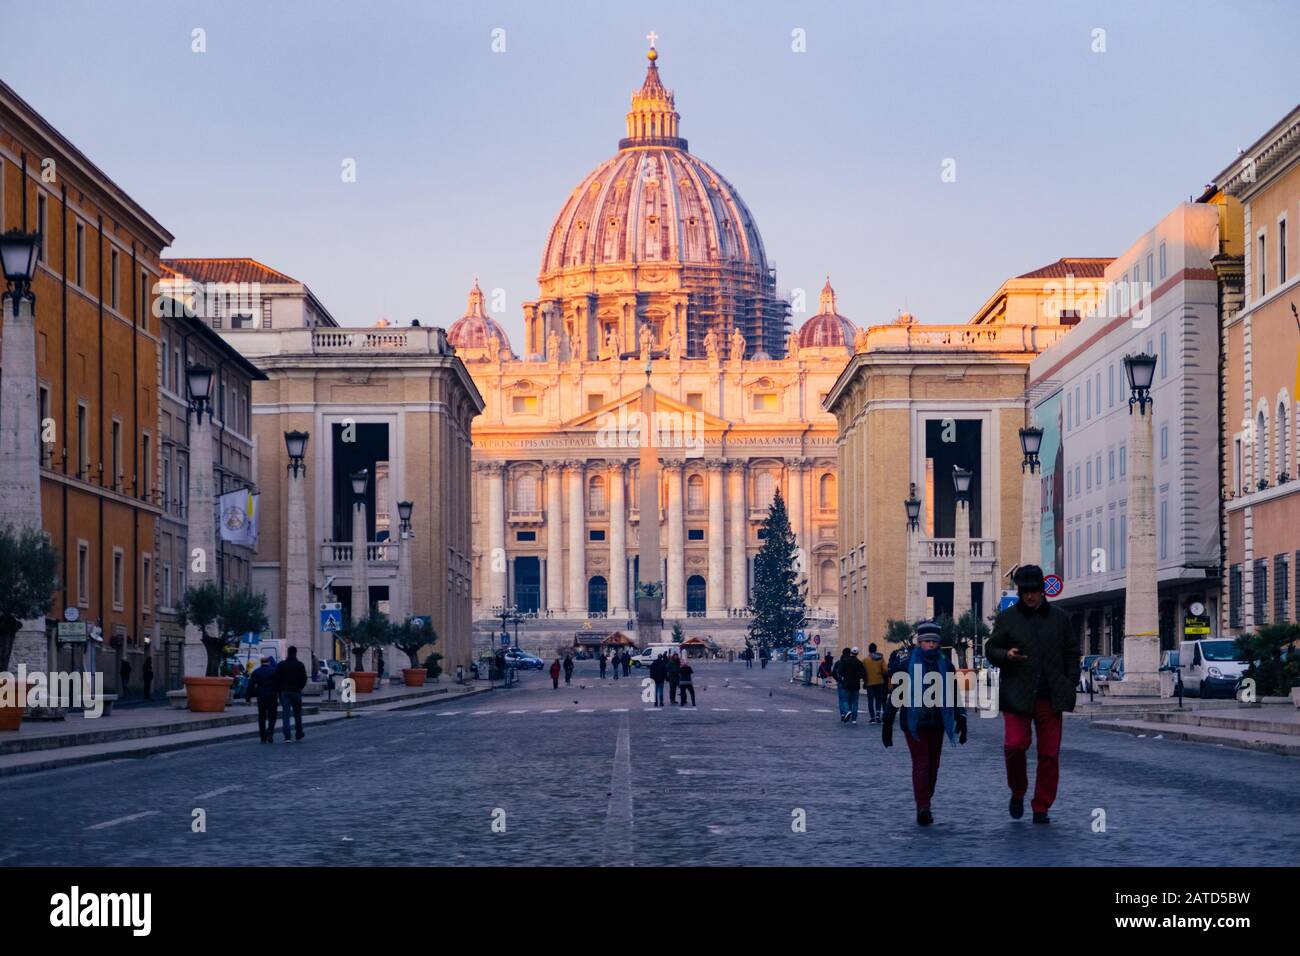 Rome, Italy - Jan 3, 2020: St. Peters Square and St. Peters Basilica  Vatican City, UNESCO World Heritage Site, Rome, Lazio, Italy, Europe Stock Photo